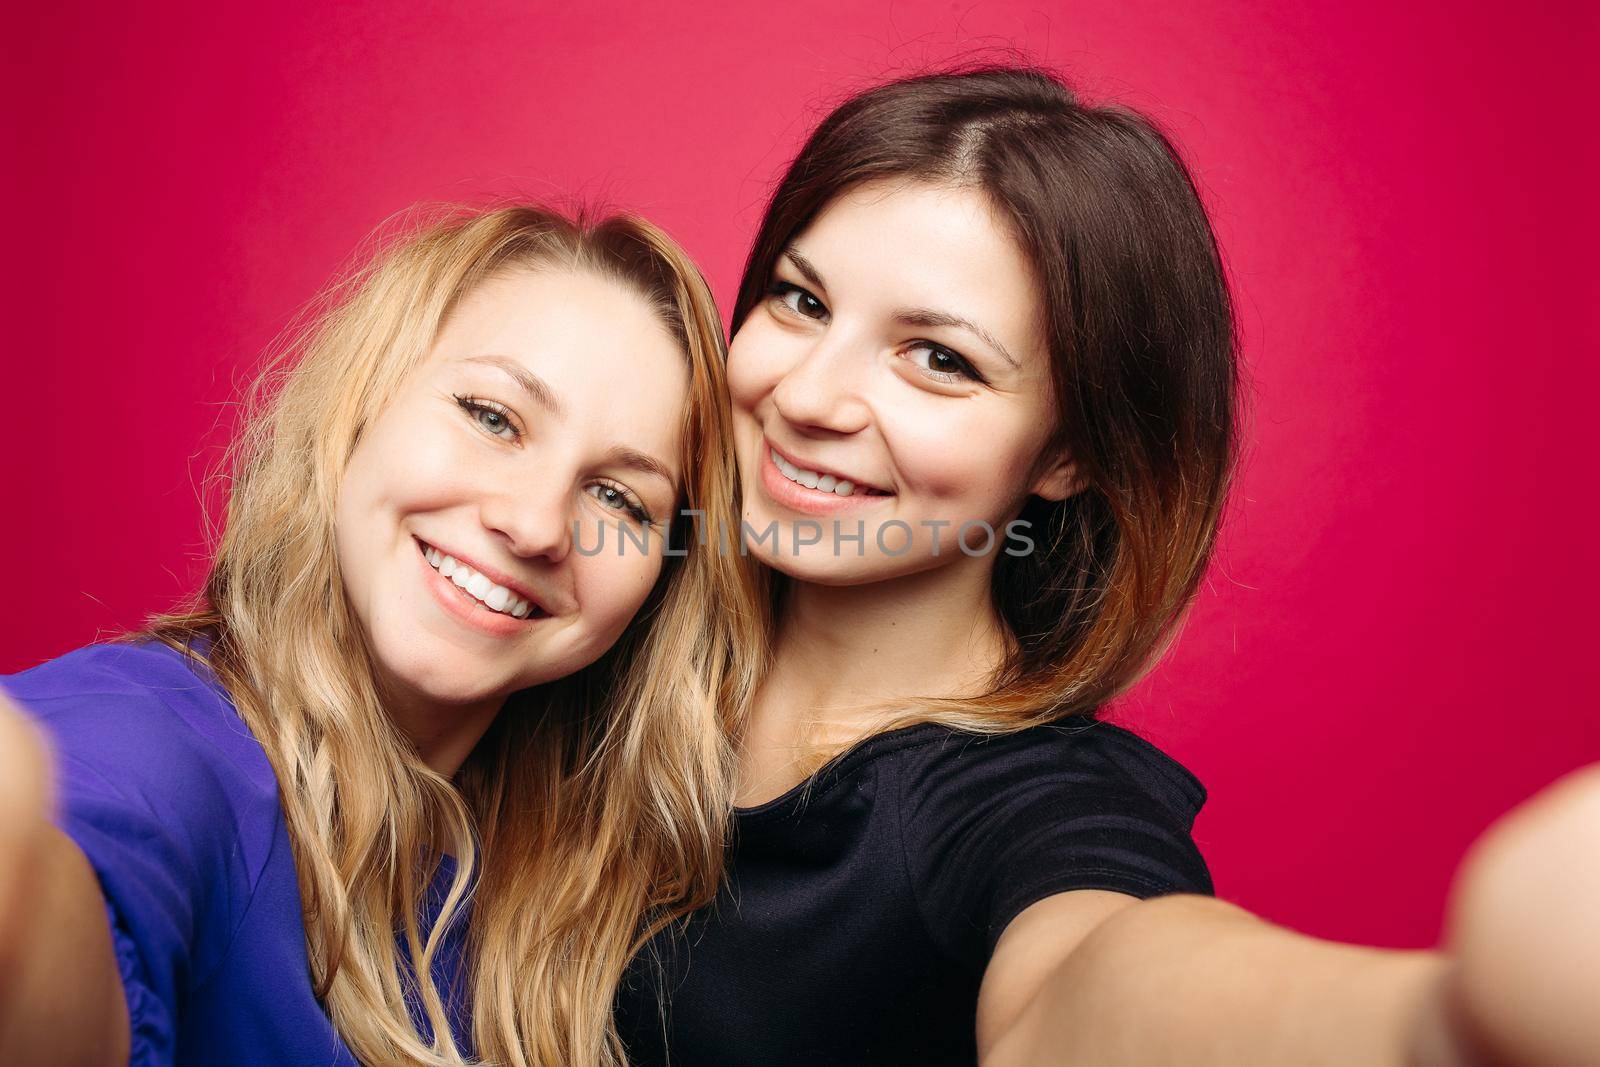 Self portrait of two beautiful, positivity girls, taking photo,smiling and posing together. Happy emotionally women with hairstyles,makeup, using camera at studio. Woman s friendship. Pink background.